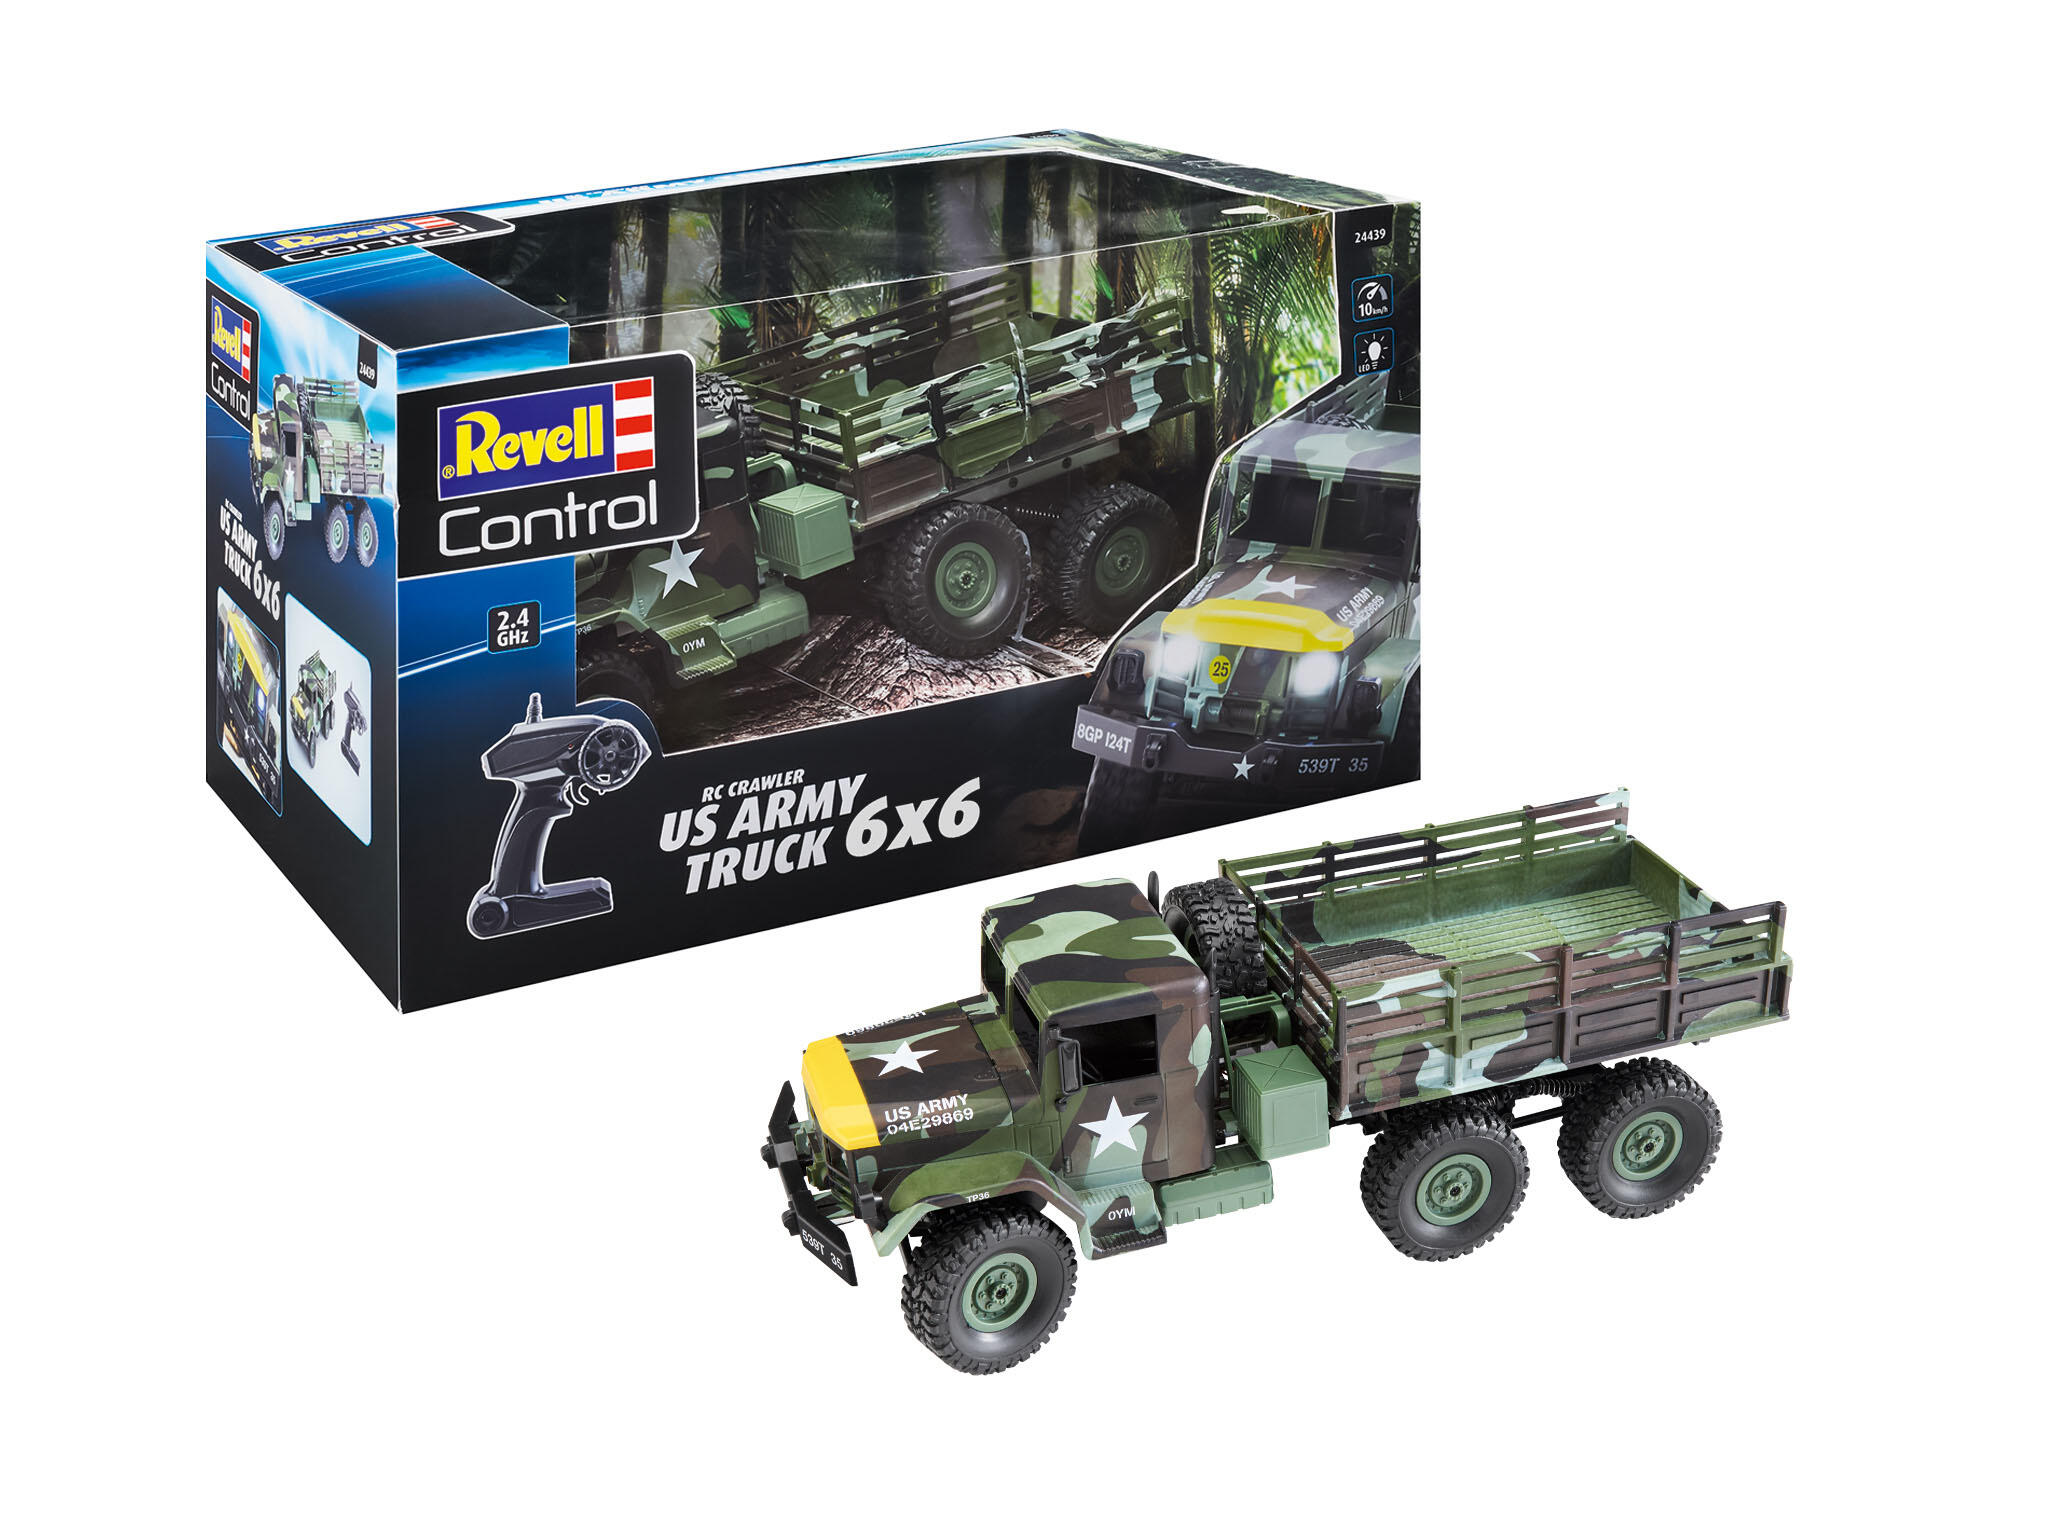 Revell 24439 RC Crawler US Army Truck Revell Control Ferngesteuertes Auto